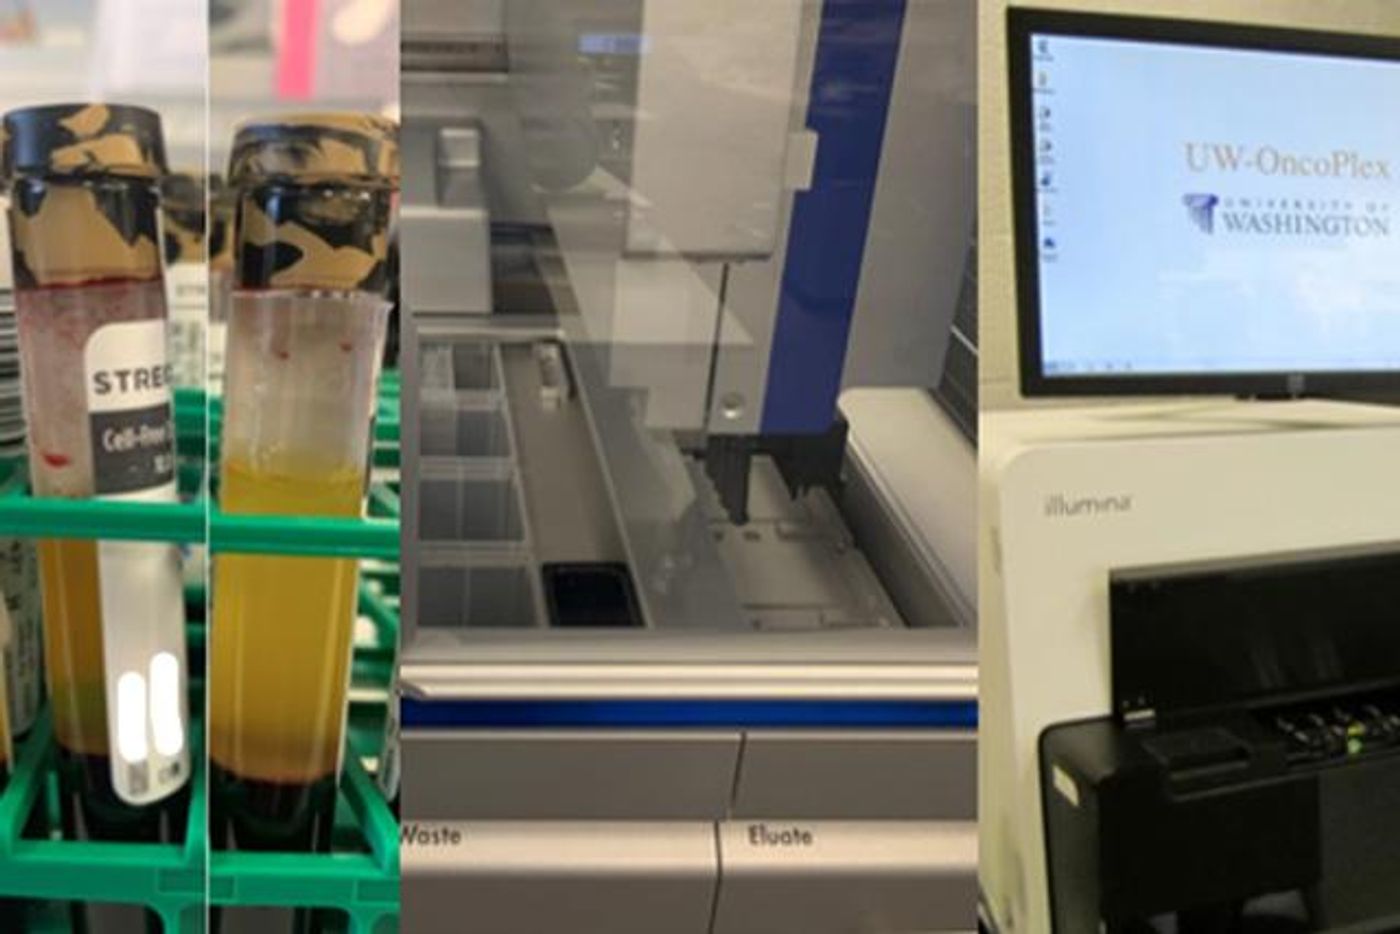 A set of images show the UW-OncoPlex cell-free DNA, or "liquid biopsy" work flow at the Genetics and Solid Tumors laboratory at University of Washington Medical Center in Seattle. The special cell-free DNA blood collection tubes on the left have been spun down. The top yellow portion is the plasma. / Credit: Colin Pritchard/UW Medicine